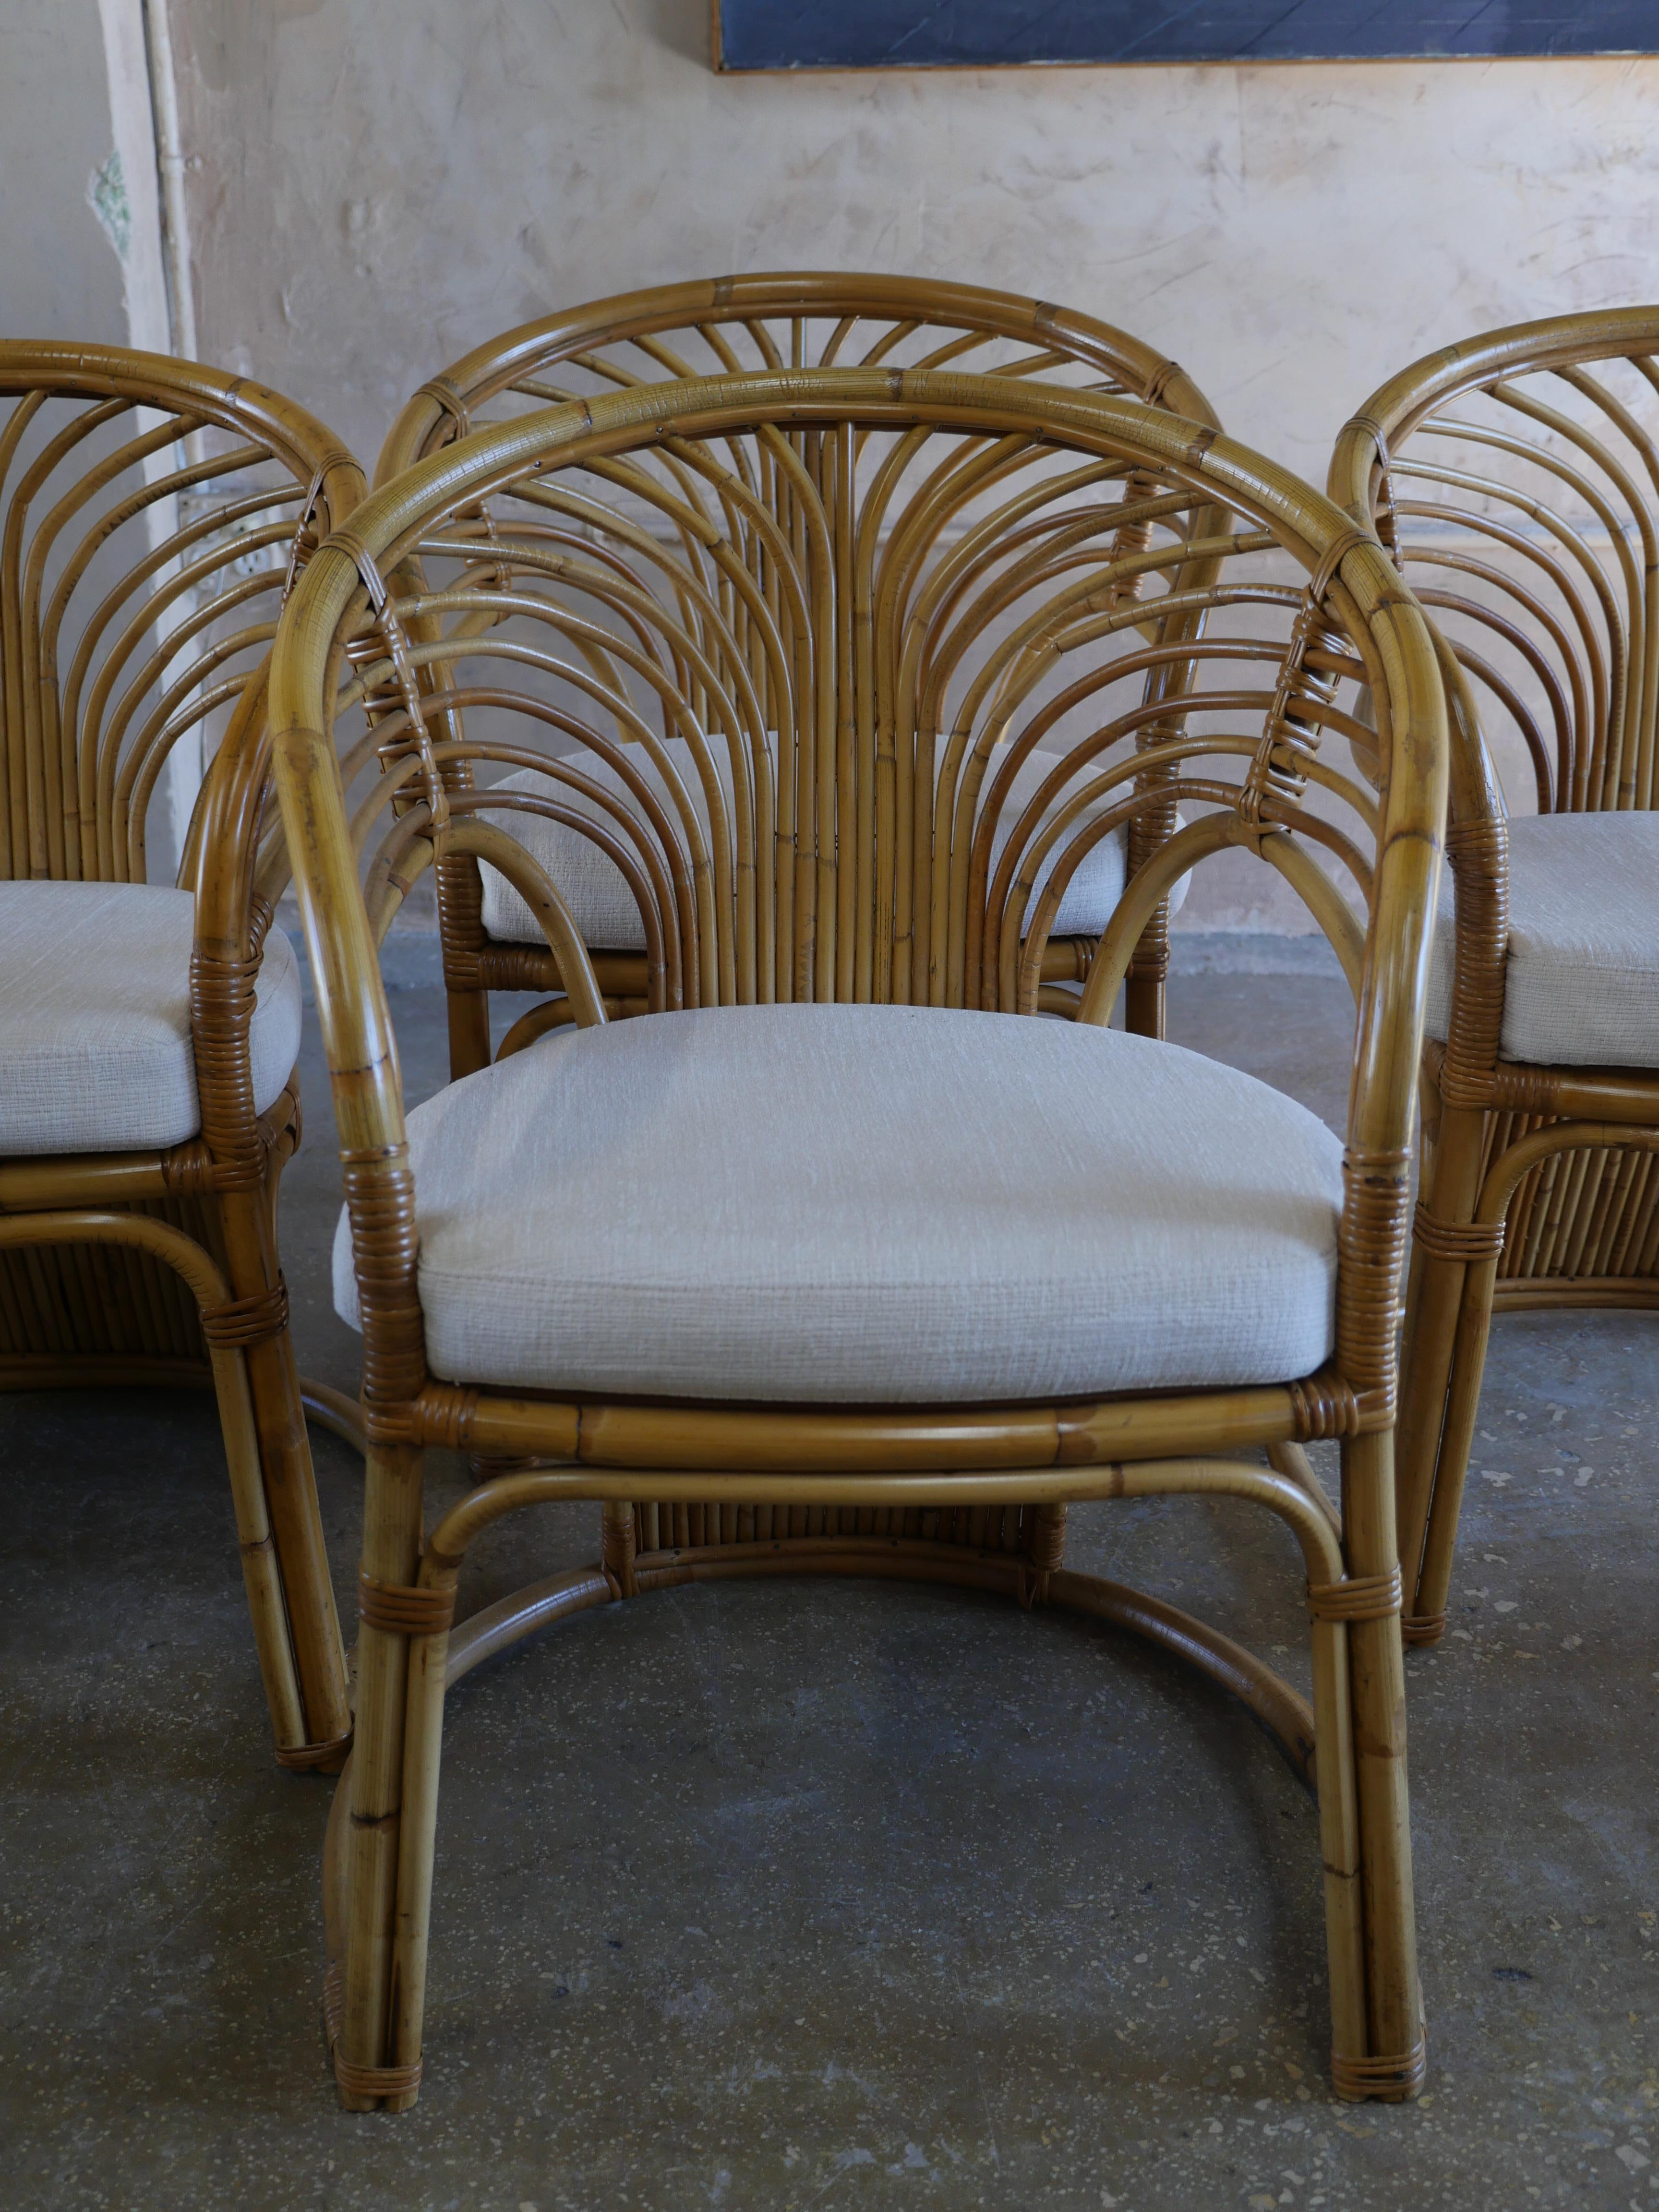 1980s Coastal Rattan Dining Chairs with Holly Hunt Chenille Fabric - Set of 4 For Sale 1